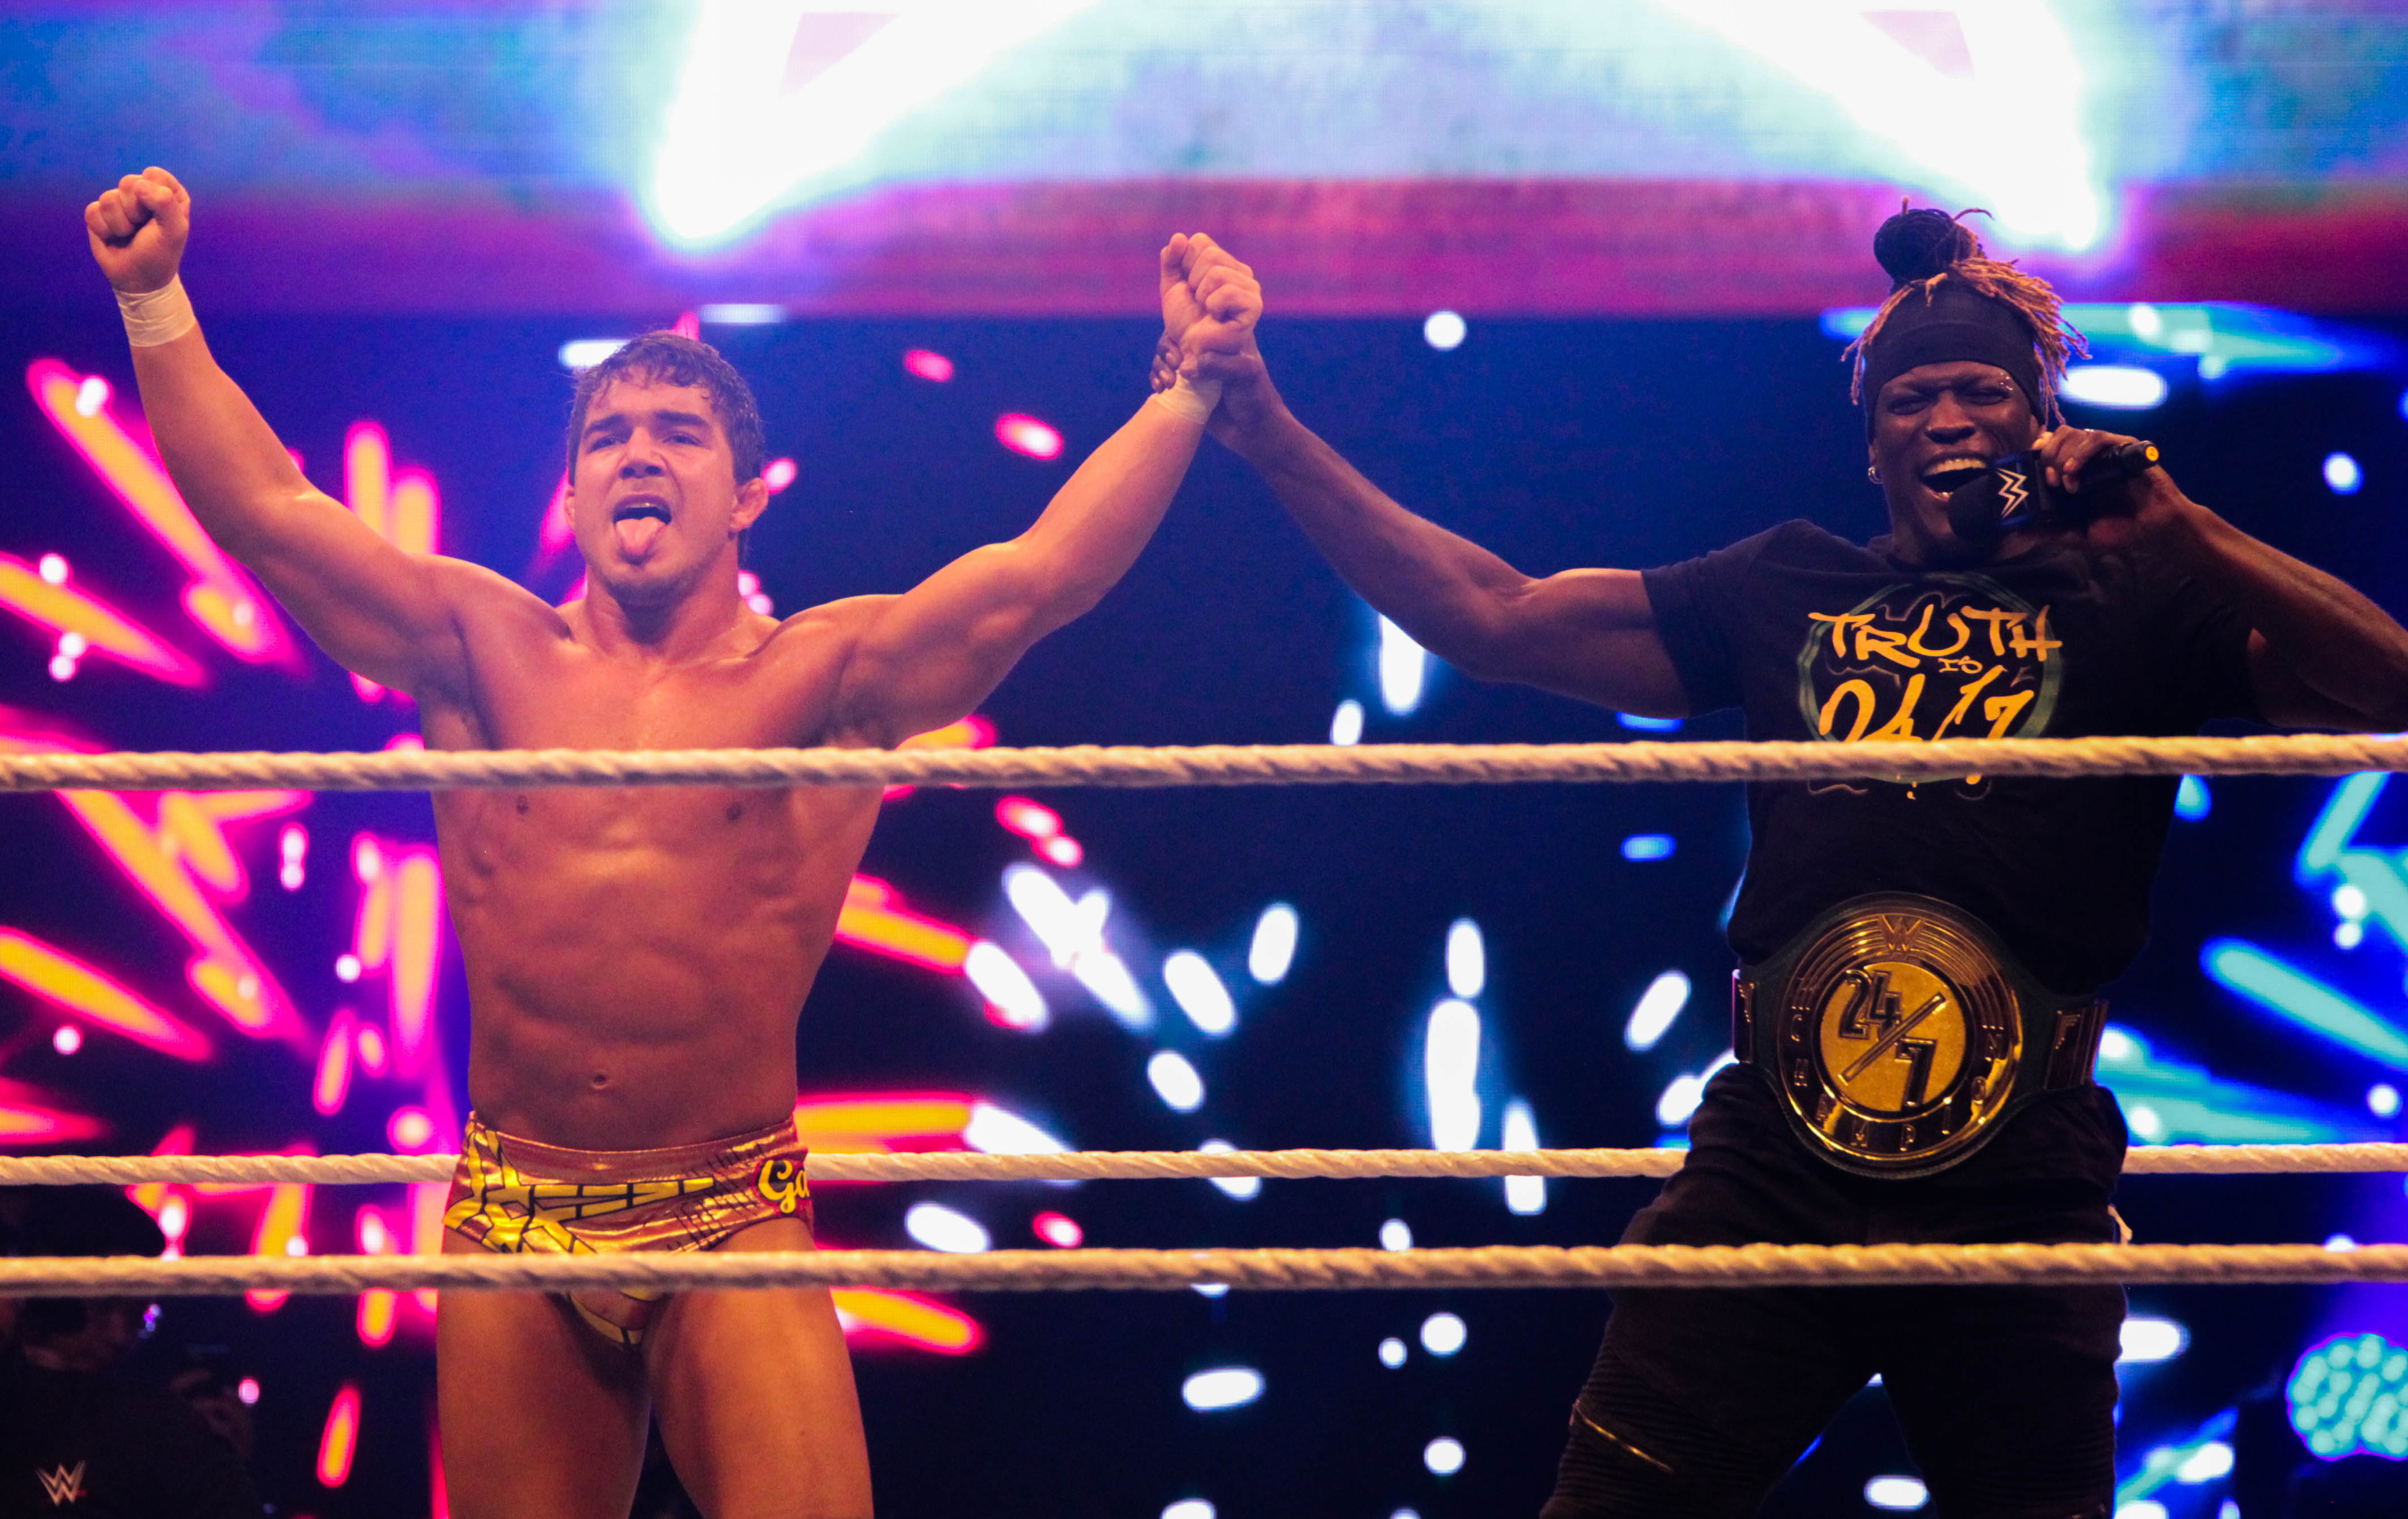 IN PHOTOS: WWE Live delivers an entertaining, action-packed night for Filipino fans